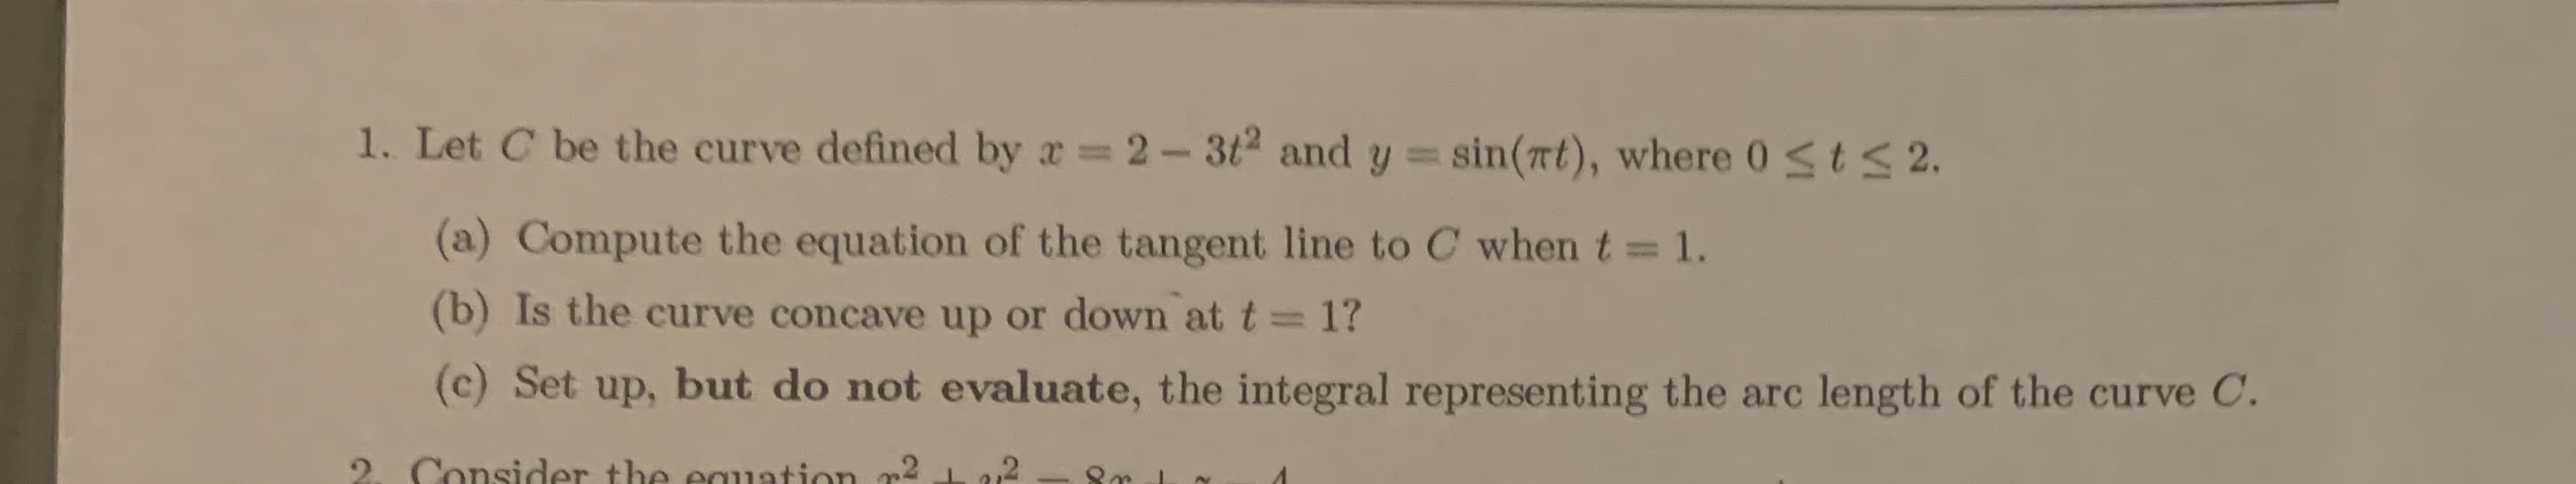 1. Let C be the curve defined by a 2- 3t2 and y= sin(at), where 0stS2.
%3D
(a) Compute the equation of the tangent line to C when t = 1.
%3D
(b) Is the curve concave up or down at t= 1?
(c) Set up, but do not evaluate, the integral representing the arc length of the curve C.
